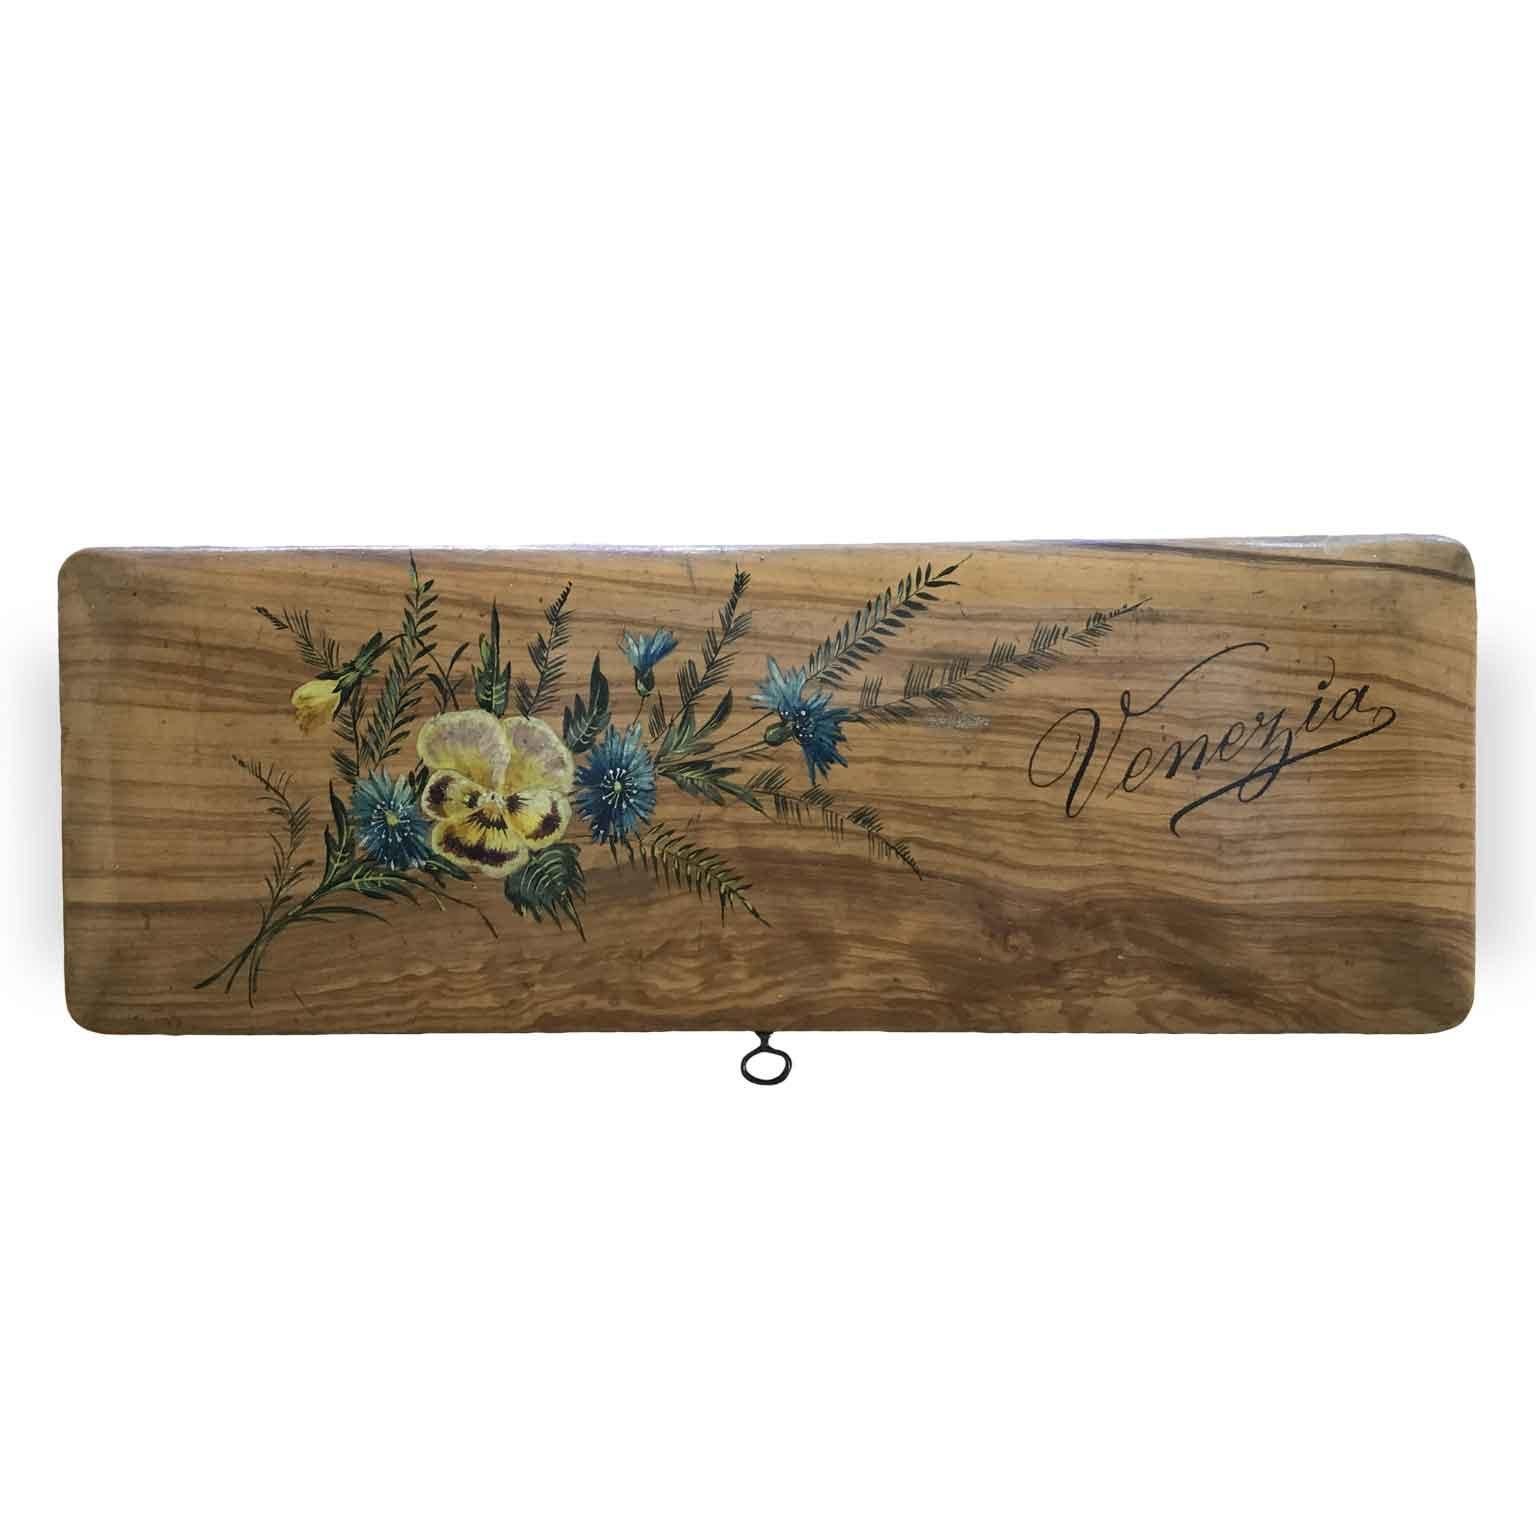 An olive hand painted rectangular gloves box, topped by a polychrome oil painted floral decoration and the inscription VENEZIA.
The case can be safely locked, the brass lock plate is finely engraved.
Good condition, wear consistent with age and